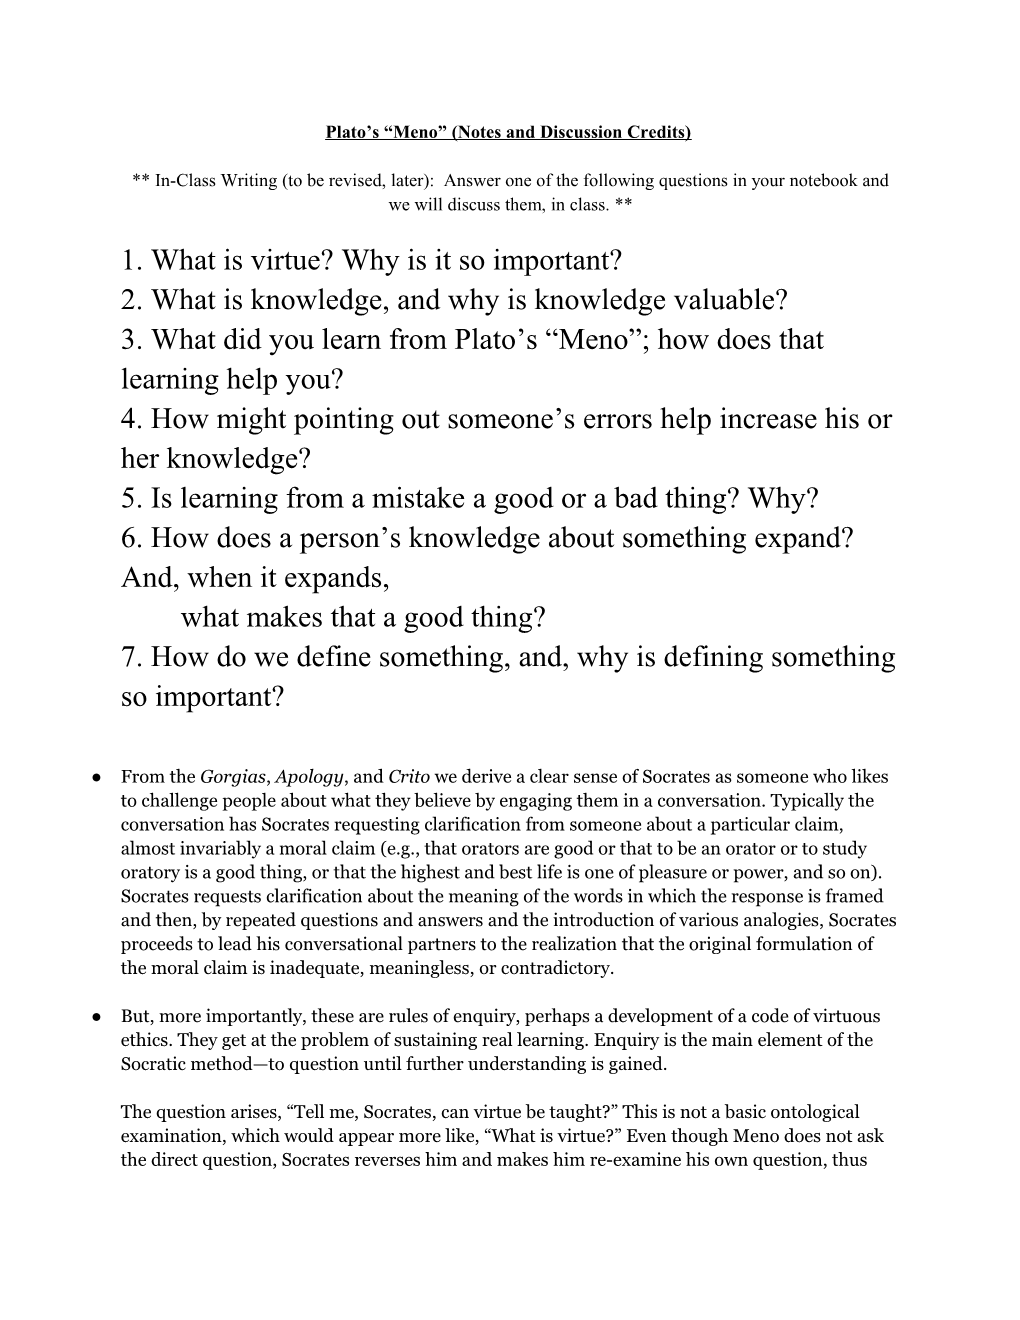 ENGL 2150 - Notes on Plato's Meno & Business Ethics